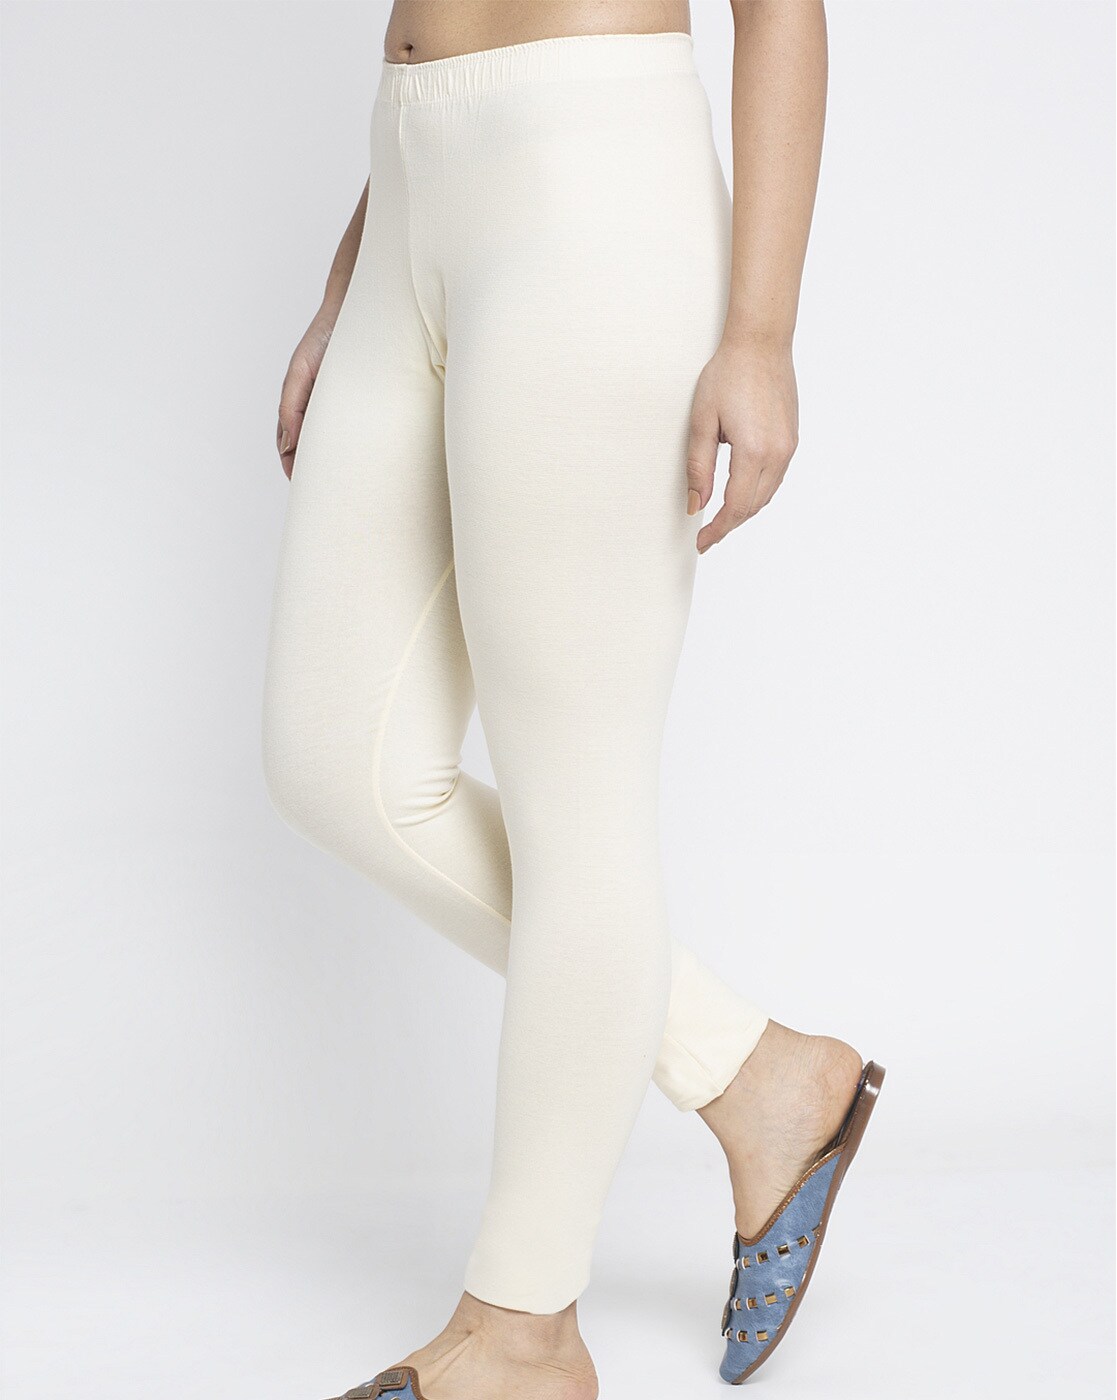 Pamo Brown Ladies Leggings, Size: L And XL at Rs 130 in New Delhi